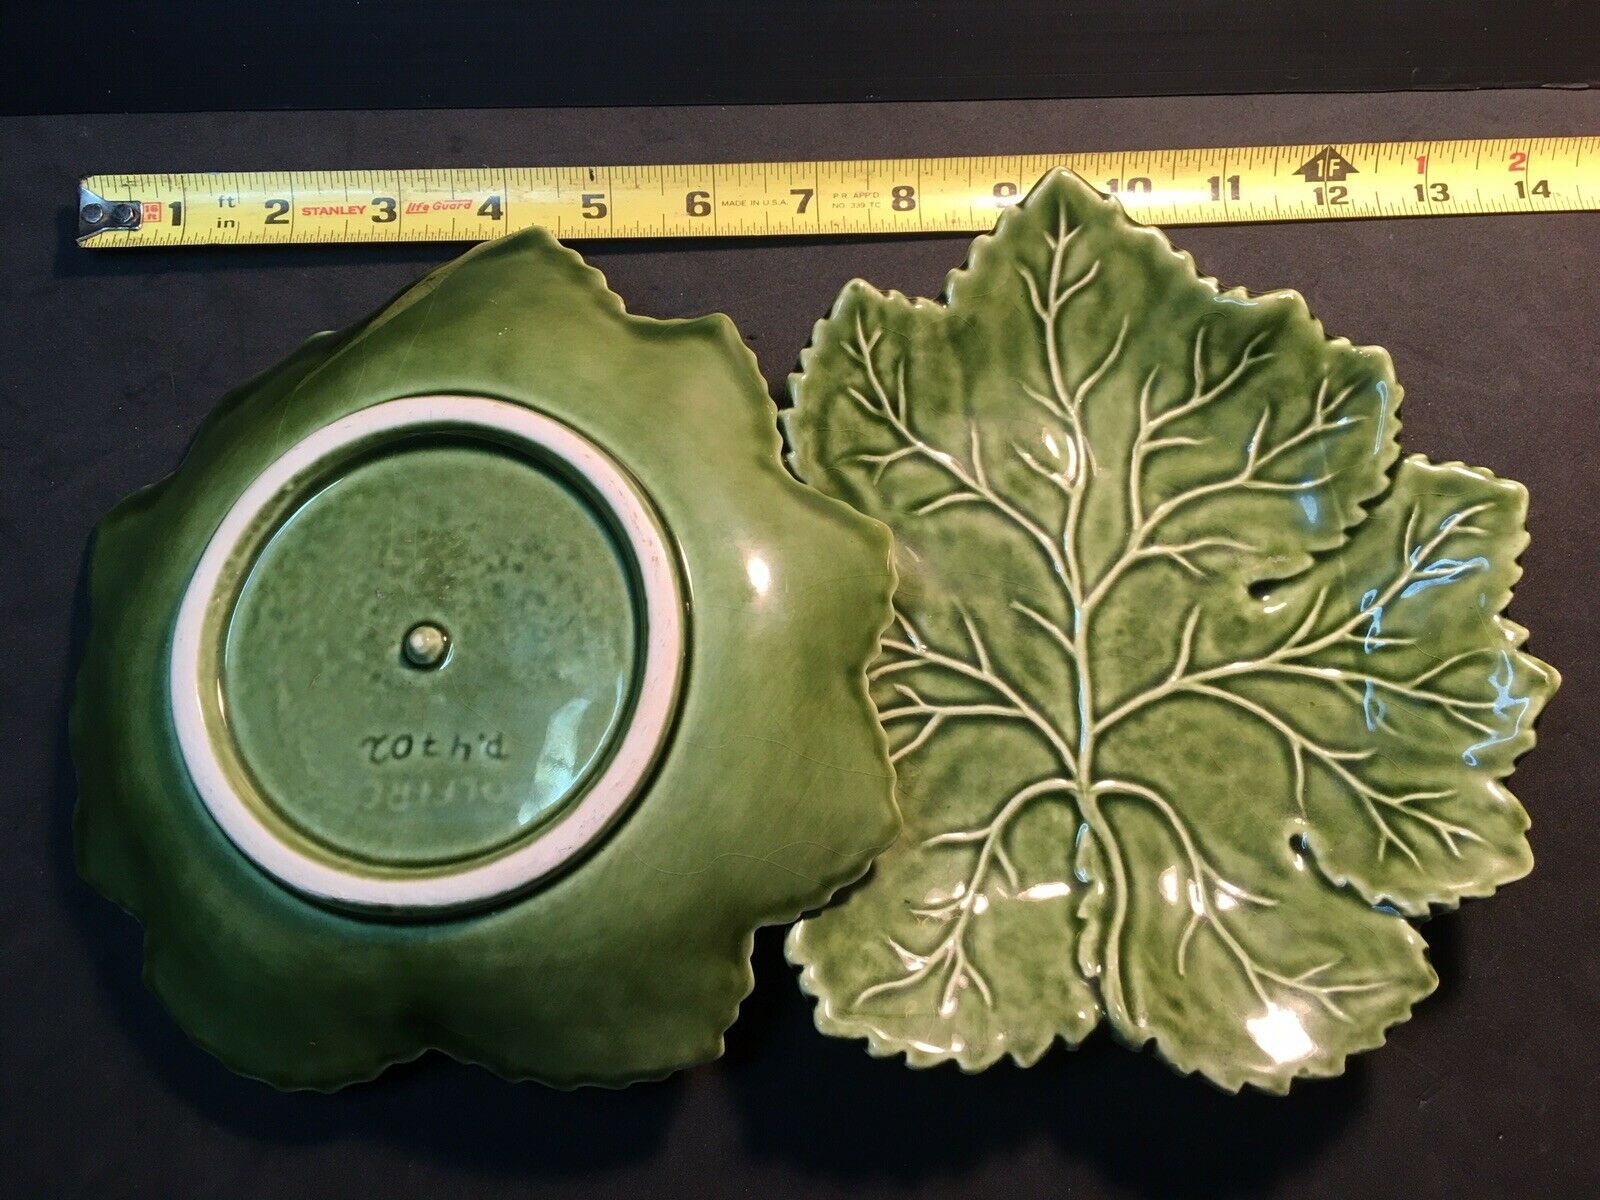 Lot Of 2 Olfaire Art Pottery Leaf Dish Tray Plate 4702 Portugal Green Embossed